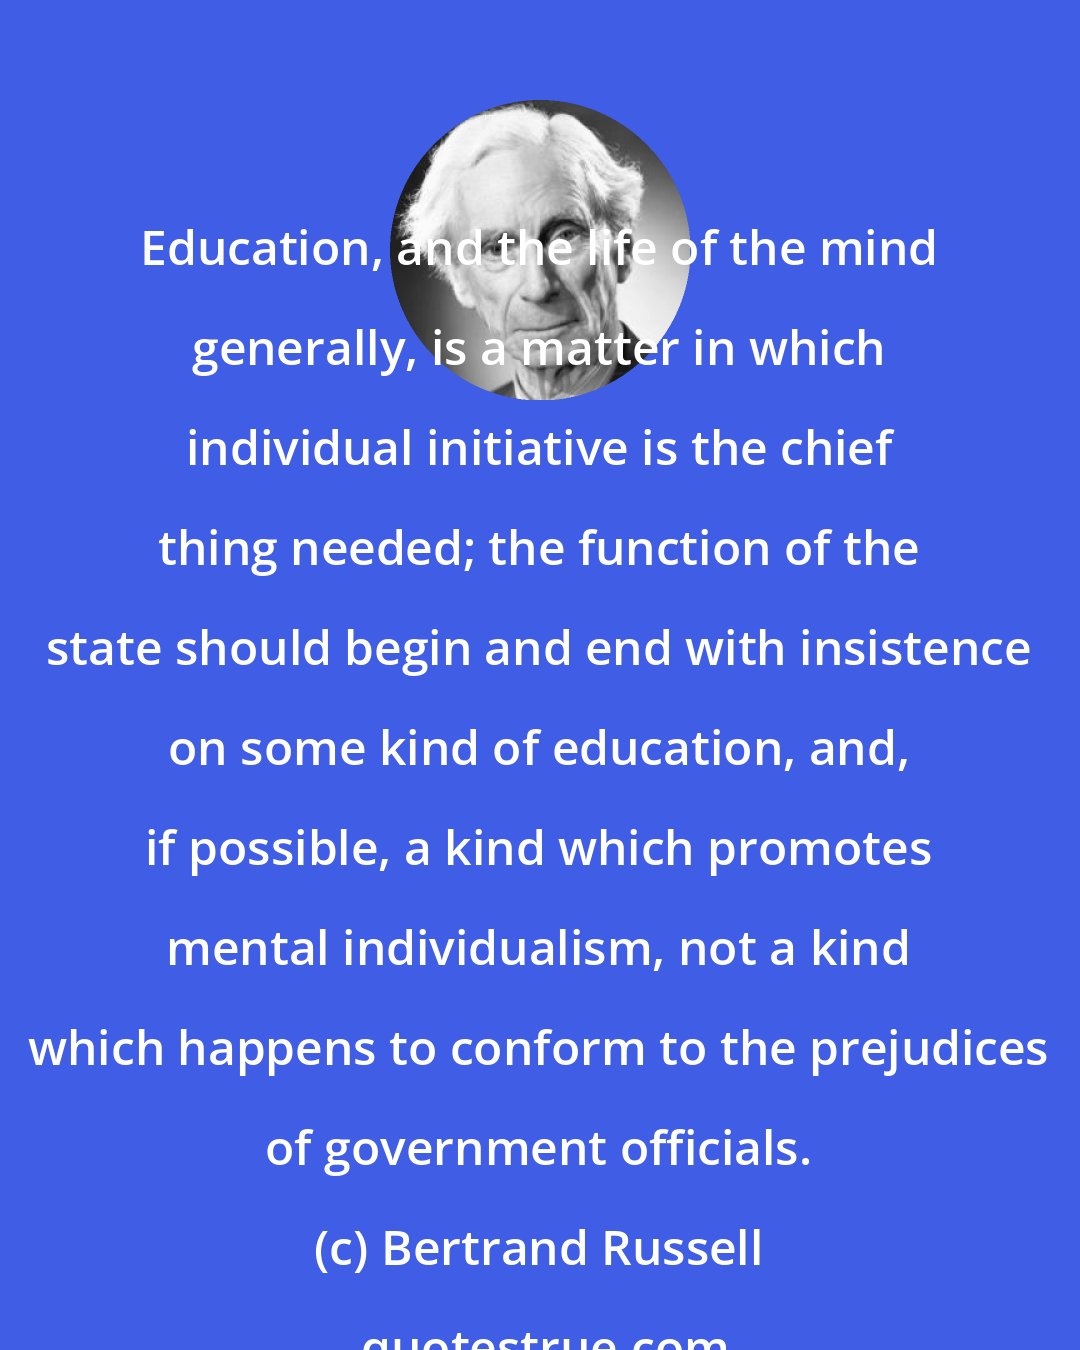 Bertrand Russell: Education, and the life of the mind generally, is a matter in which individual initiative is the chief thing needed; the function of the state should begin and end with insistence on some kind of education, and, if possible, a kind which promotes mental individualism, not a kind which happens to conform to the prejudices of government officials.